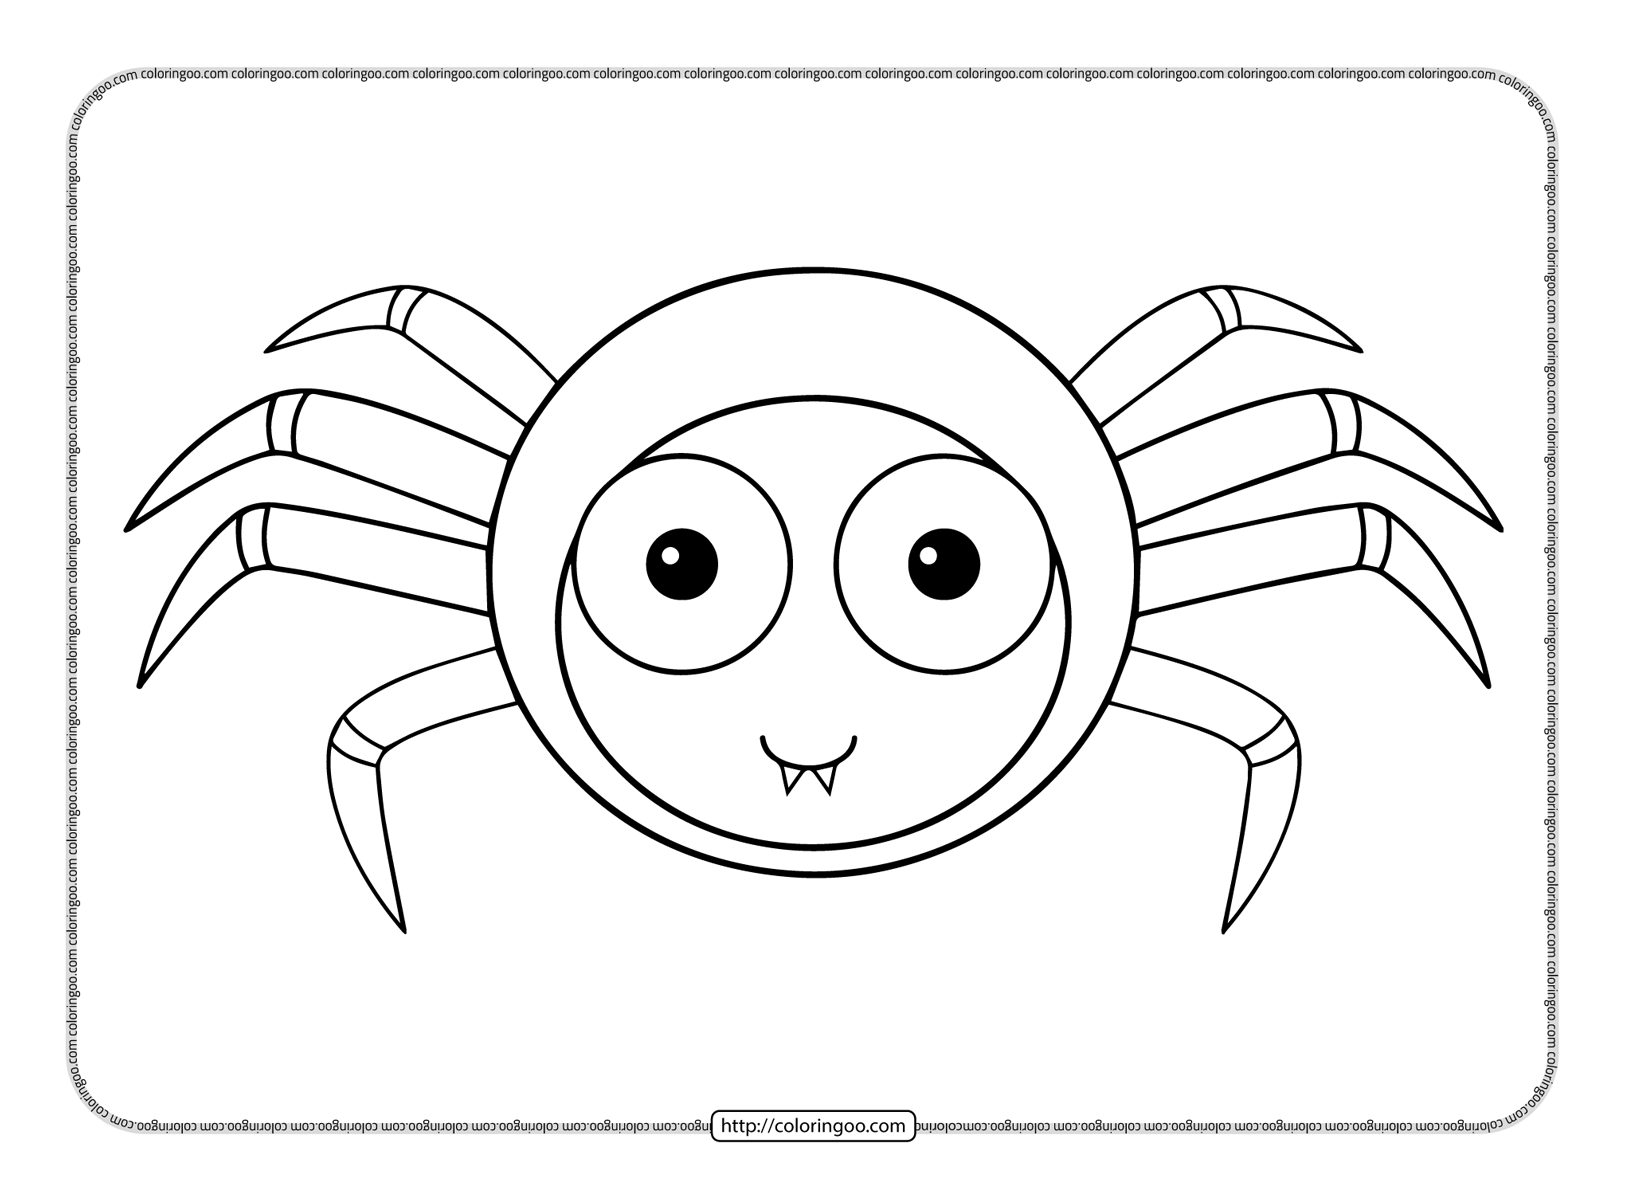 cute cartoon spider coloring pages